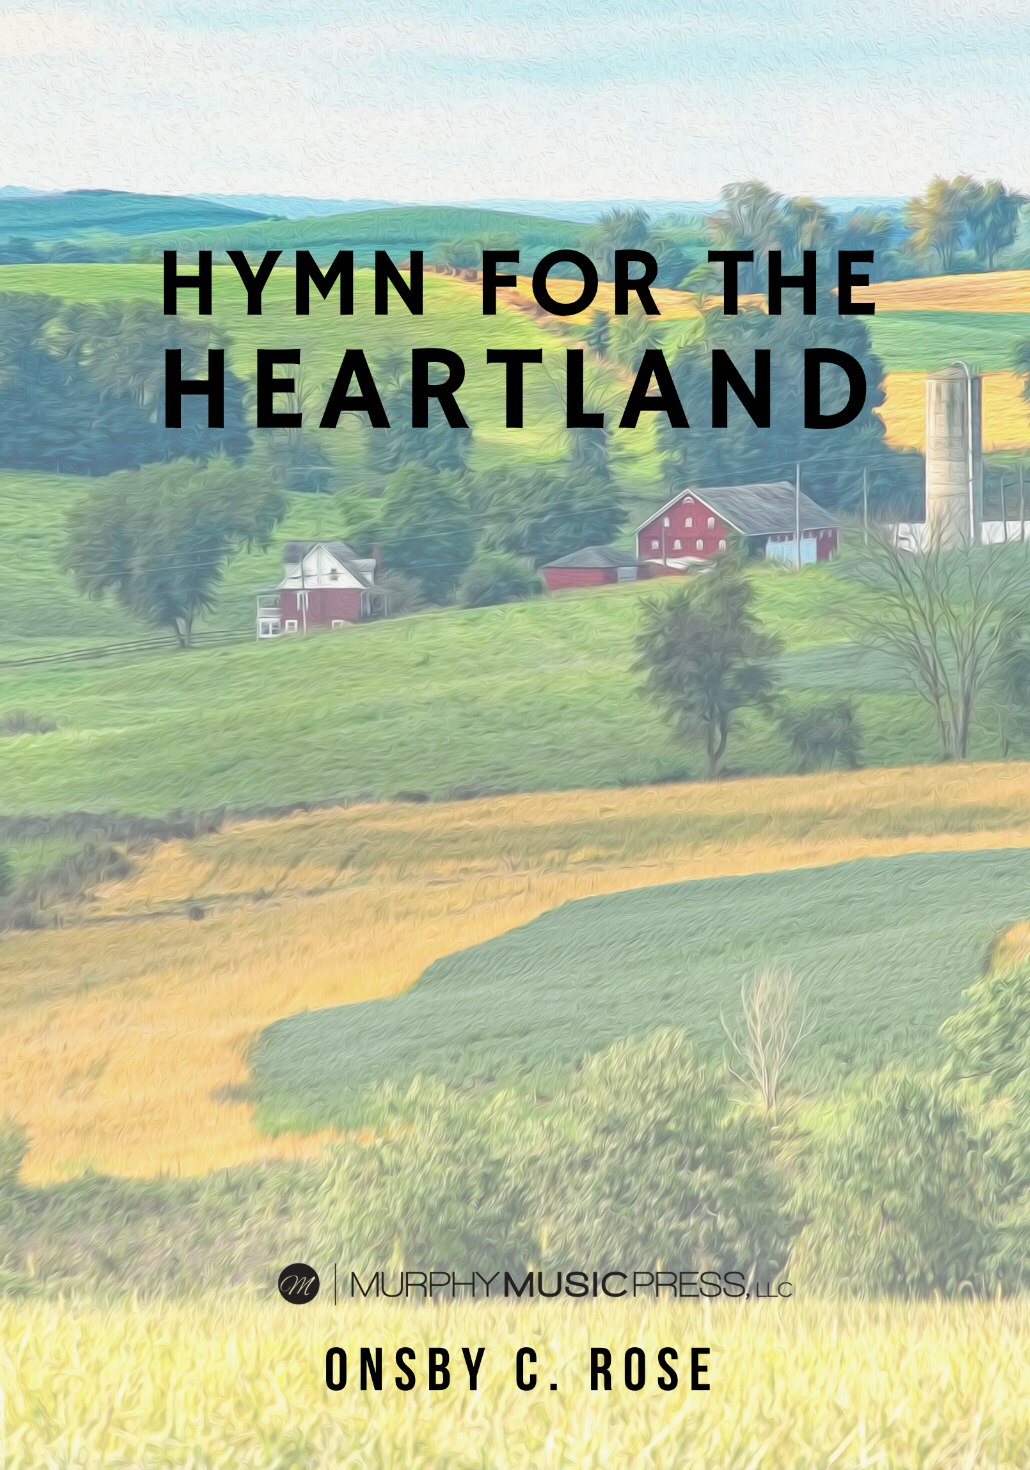 Hymn For The Heartland by Onsby C. Rose